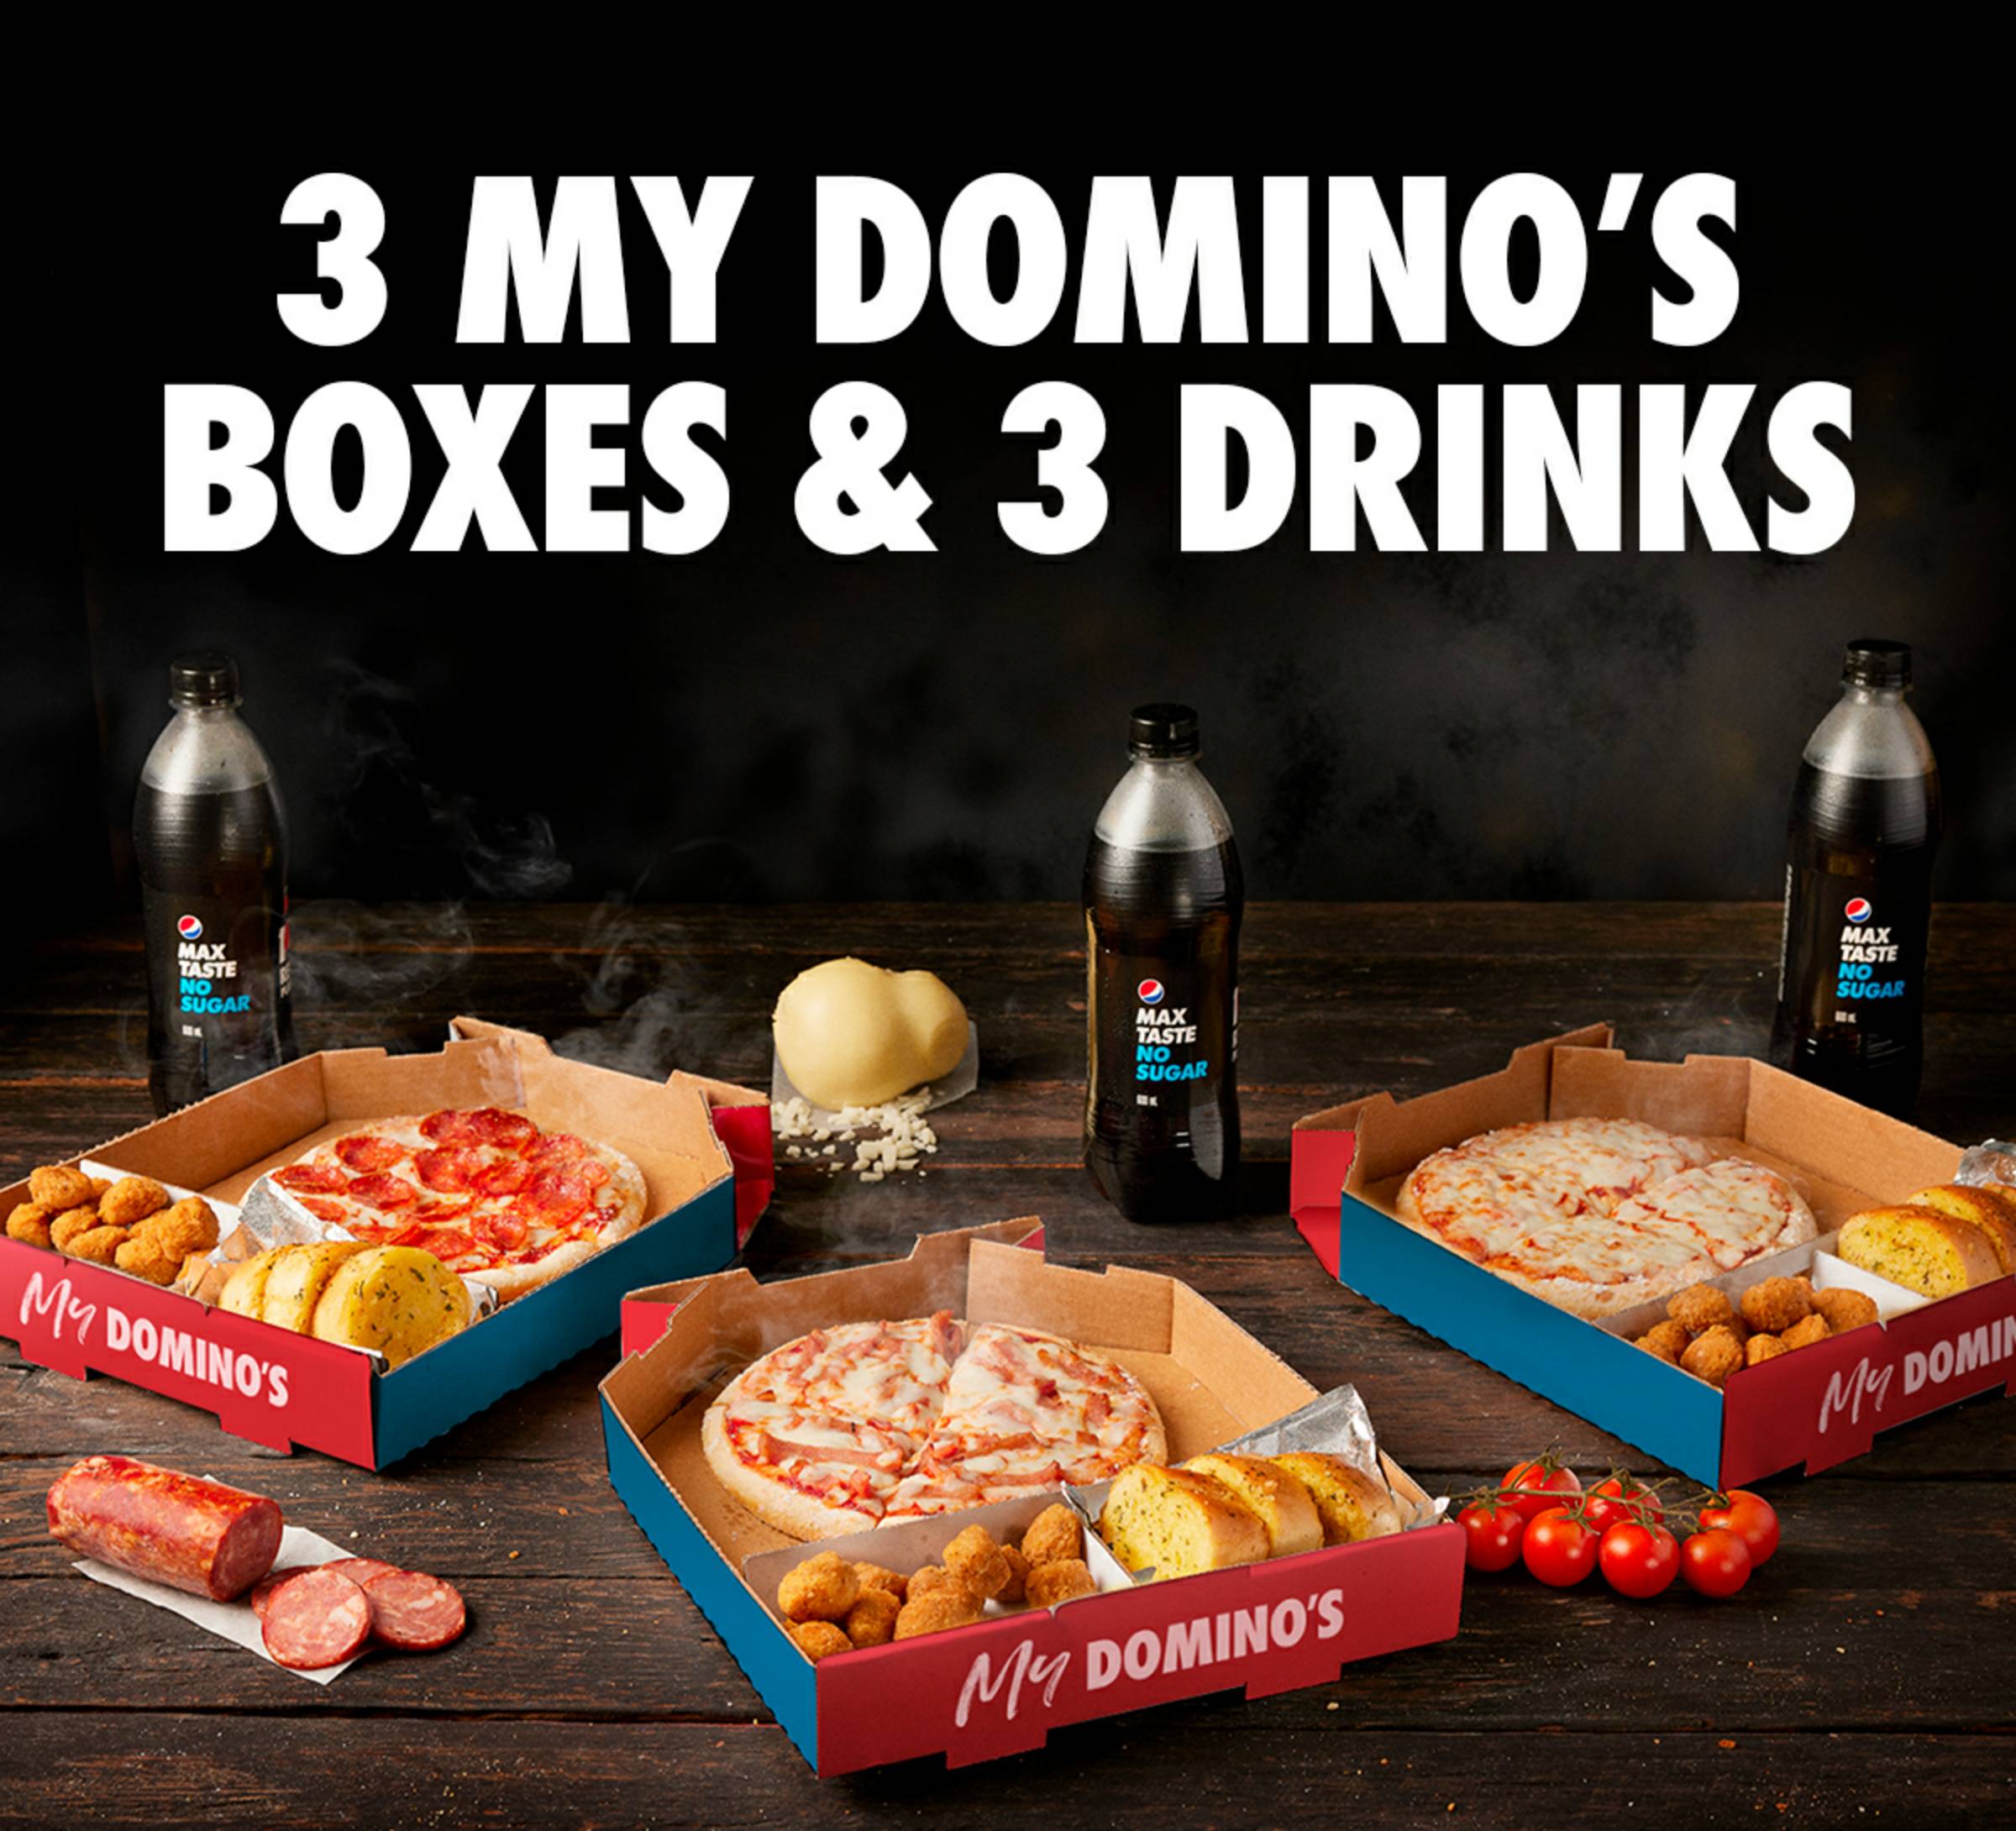 Domino's - 3 My Domino’s plus 3 Drinks $44 Delivered